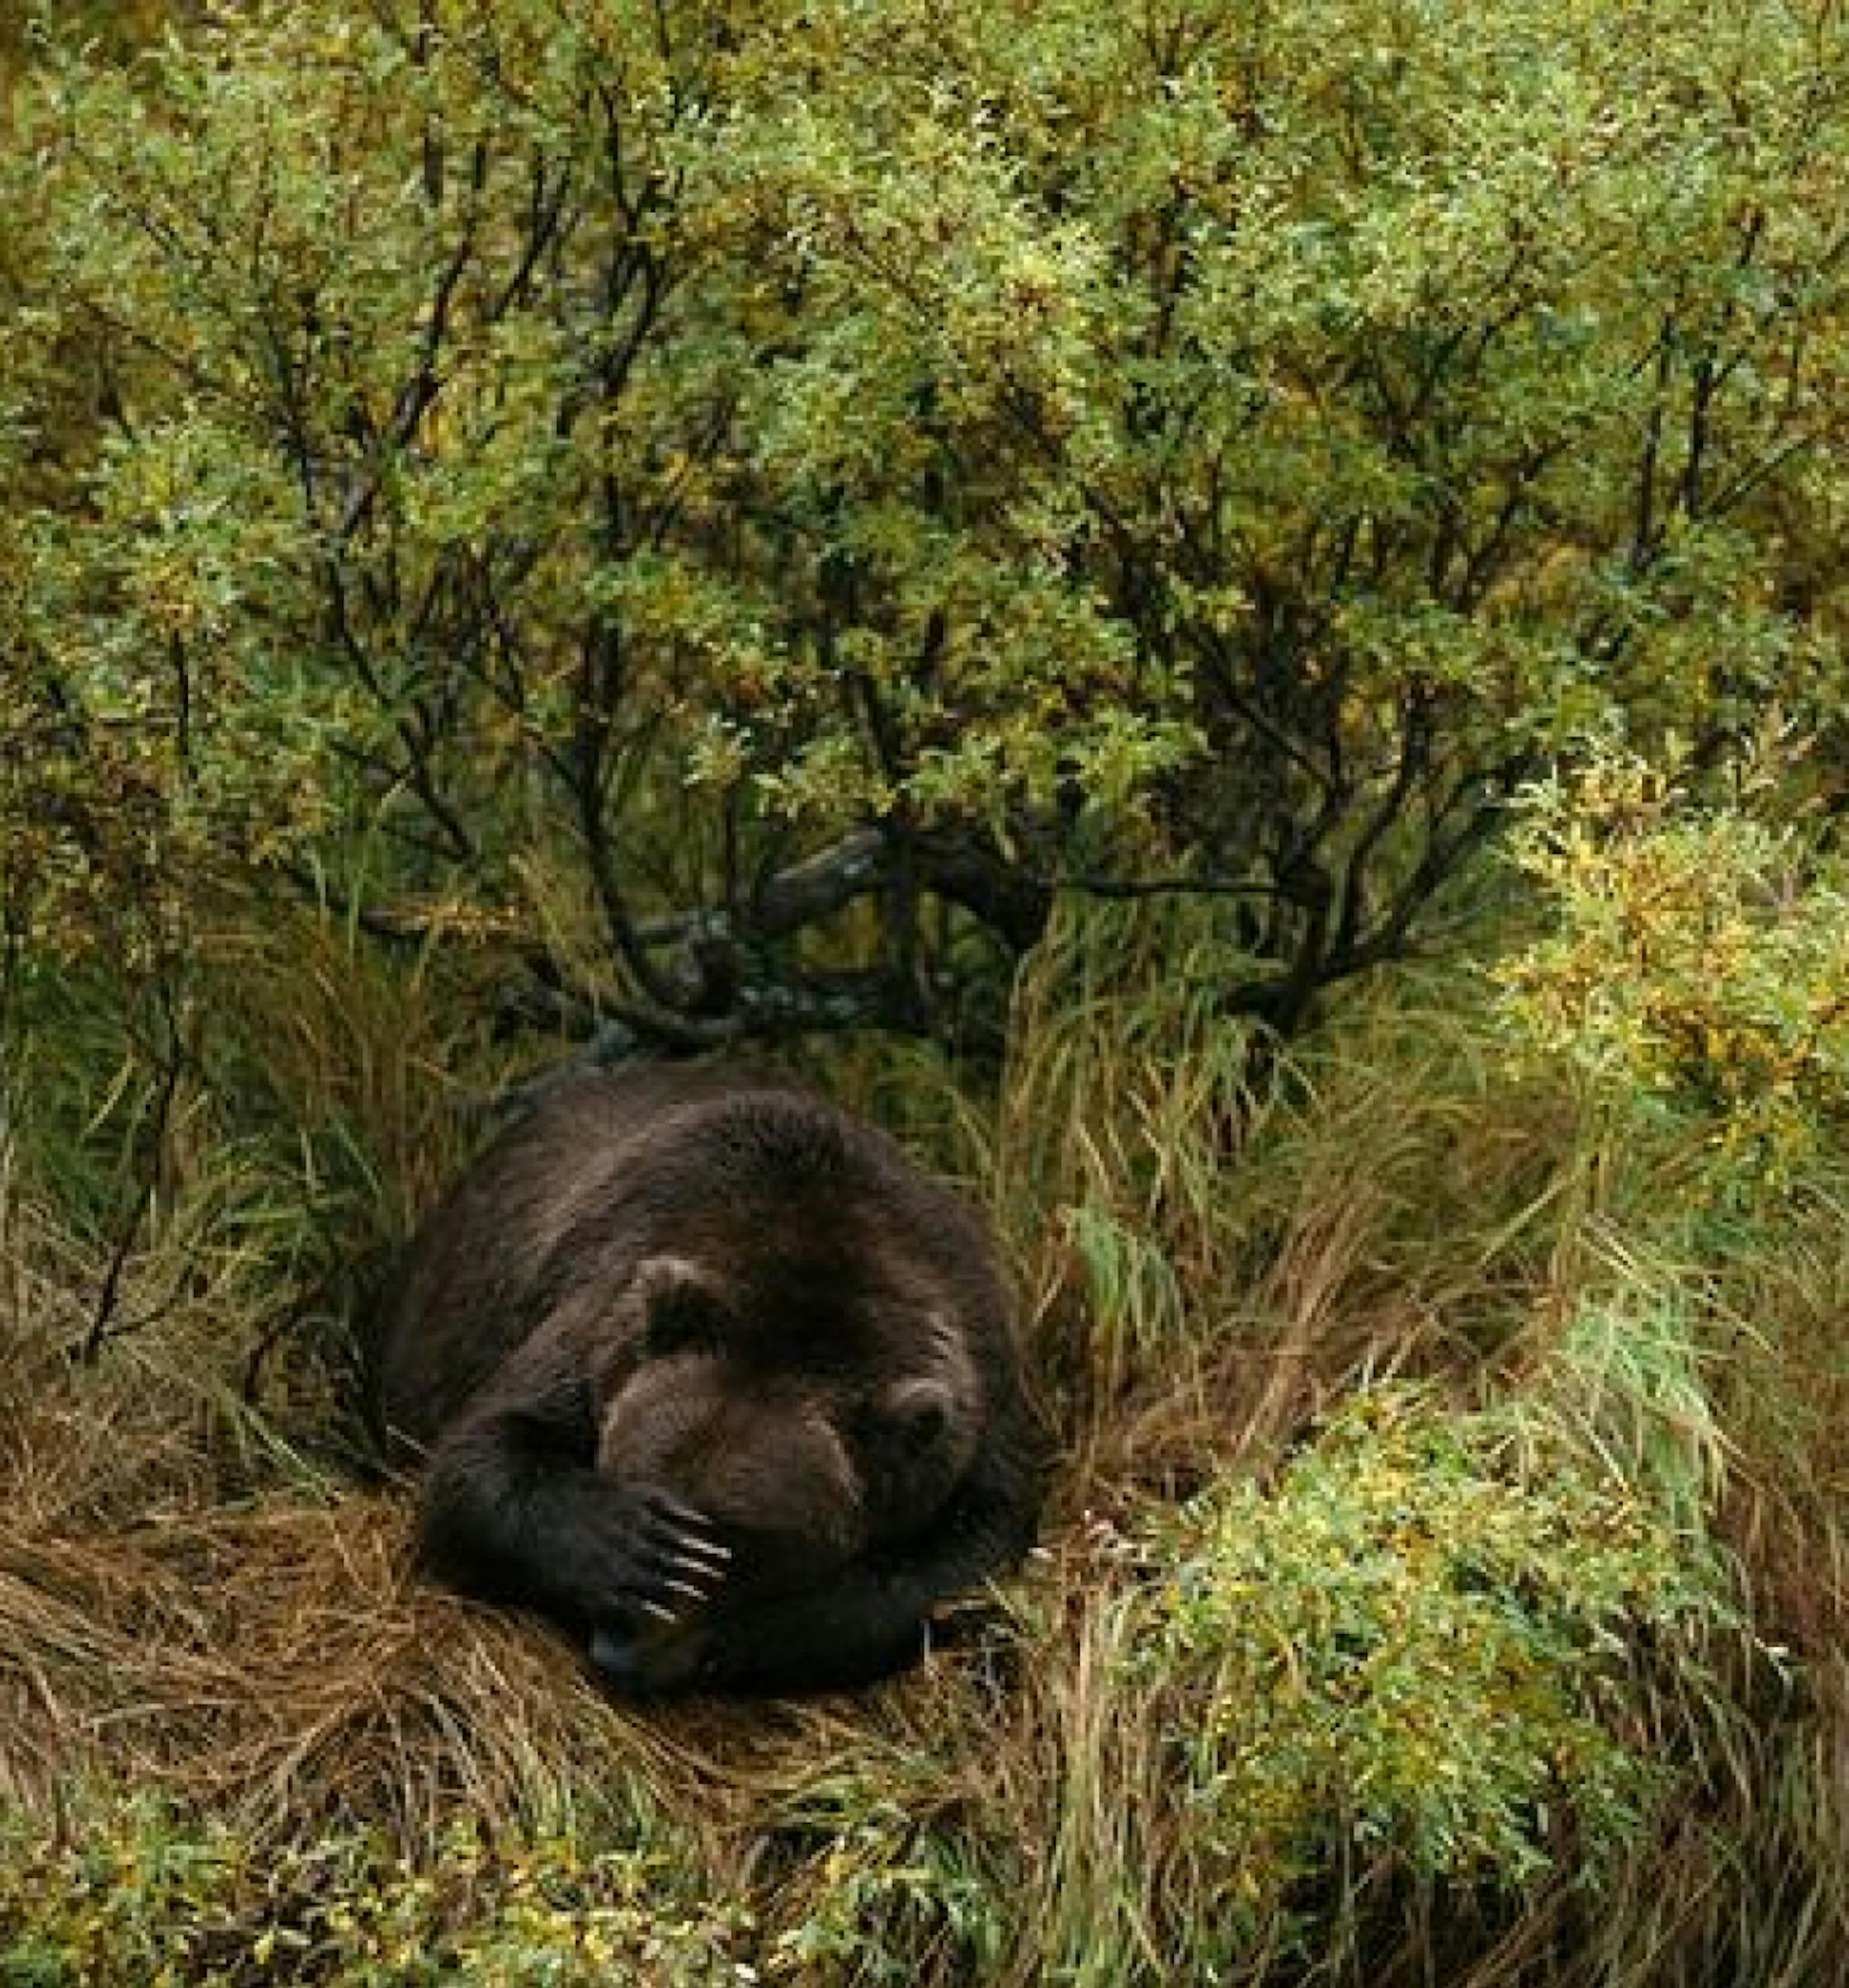 an image showing a sleeping bear in the woods and grass, he has a paw covering his head. its a vintage national geographic image.